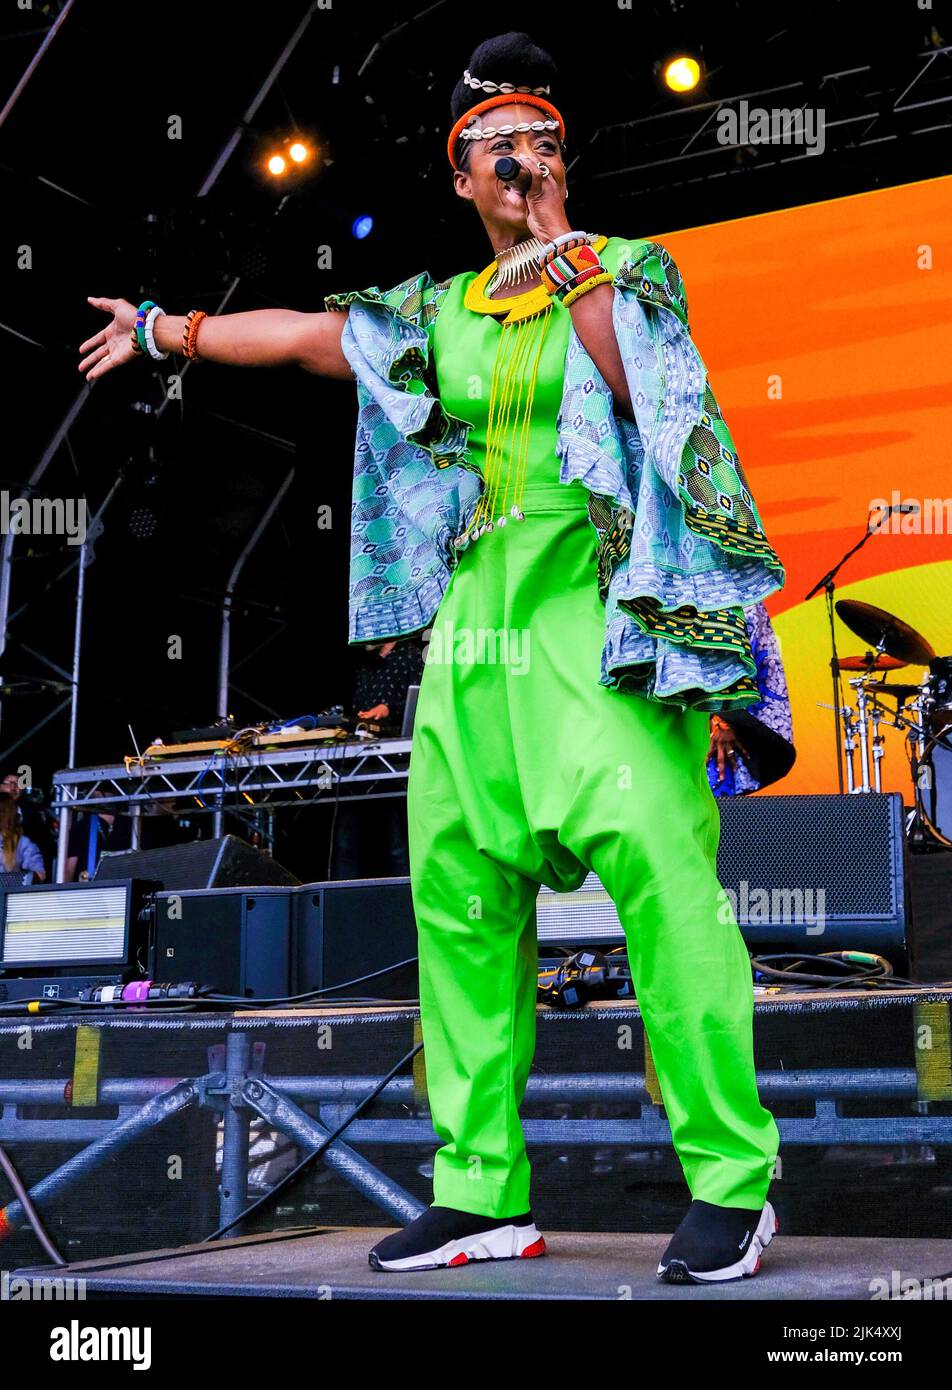 Malmesbury, Wiltshire, UK. 30th July, 2022. Malmesbury Wiltshire. Womad Festival. Les Amazones D Afrique from Mali, Benin & Guinea, performing on the Open Air Stage. Credit: charlie bryan/Alamy Live News Stock Photo